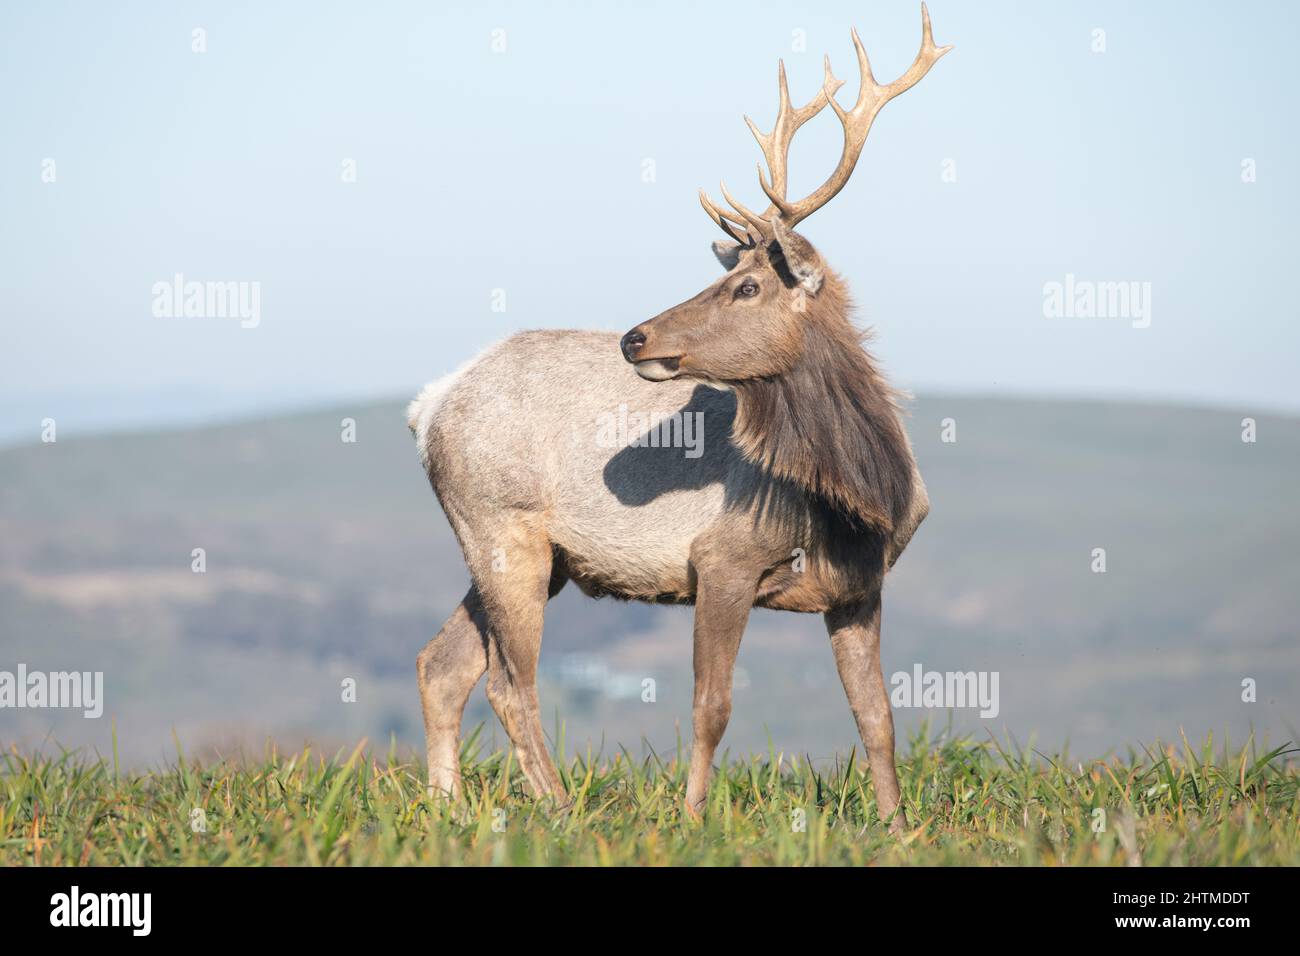 A young male tule elk (Cervus canadensis nannodes) with antlers at the Tomales Point elk reserve in Point Reyes National Seashore, California, USA. Stock Photo